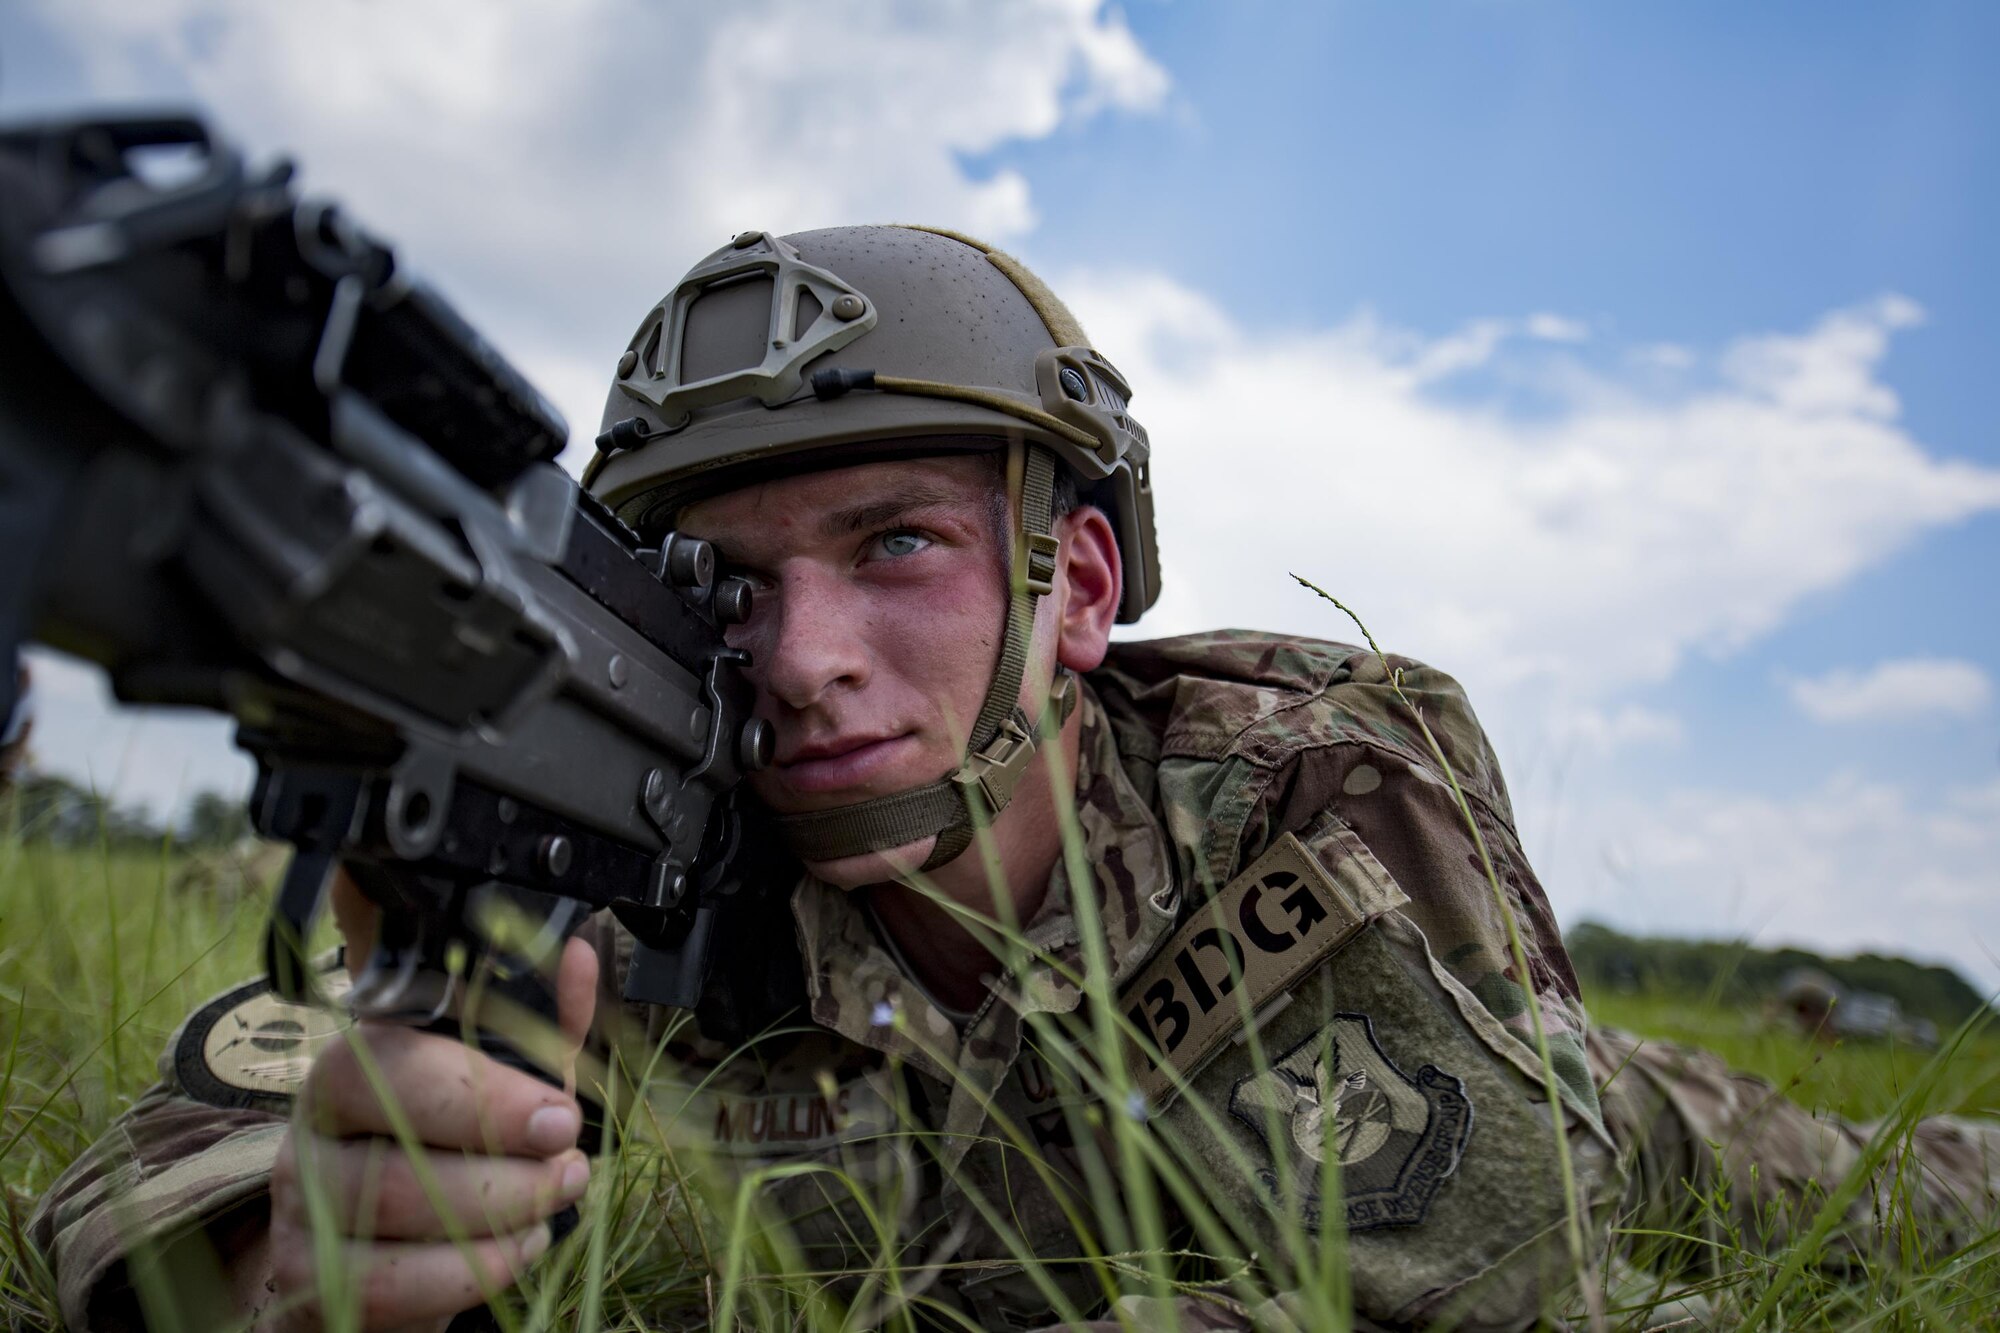 Airman 1st Class Sean Mullins, 823d Base Defense Squadron fire team member, secures a perimeter, July 21, 2017, at the Lee Fulp Drop Zone in Tifton, Ga. This training was in preparation for an upcoming mission readiness exercise where airmen serve as an airborne advanced team, with the mission to create an initial presence and clear a path for follow-on forces to arrive on scene. (U.S. Air Force photo by Airman 1st Class Daniel Snider)